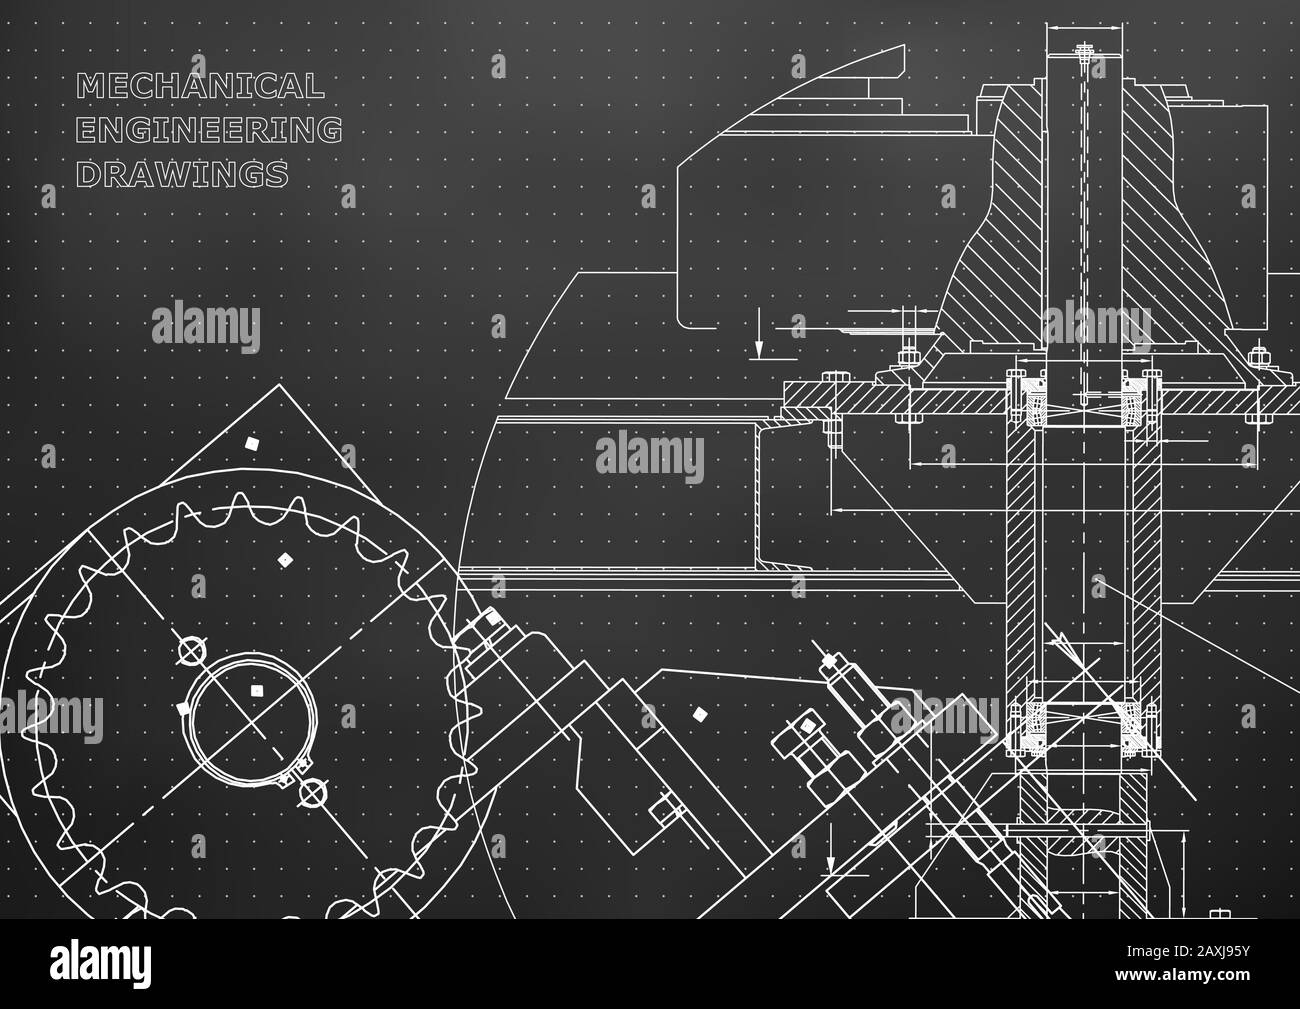 Blueprints. Mechanical drawings. Engineering illustrations. Technical Design. Banner. Black background. Points Stock Vector